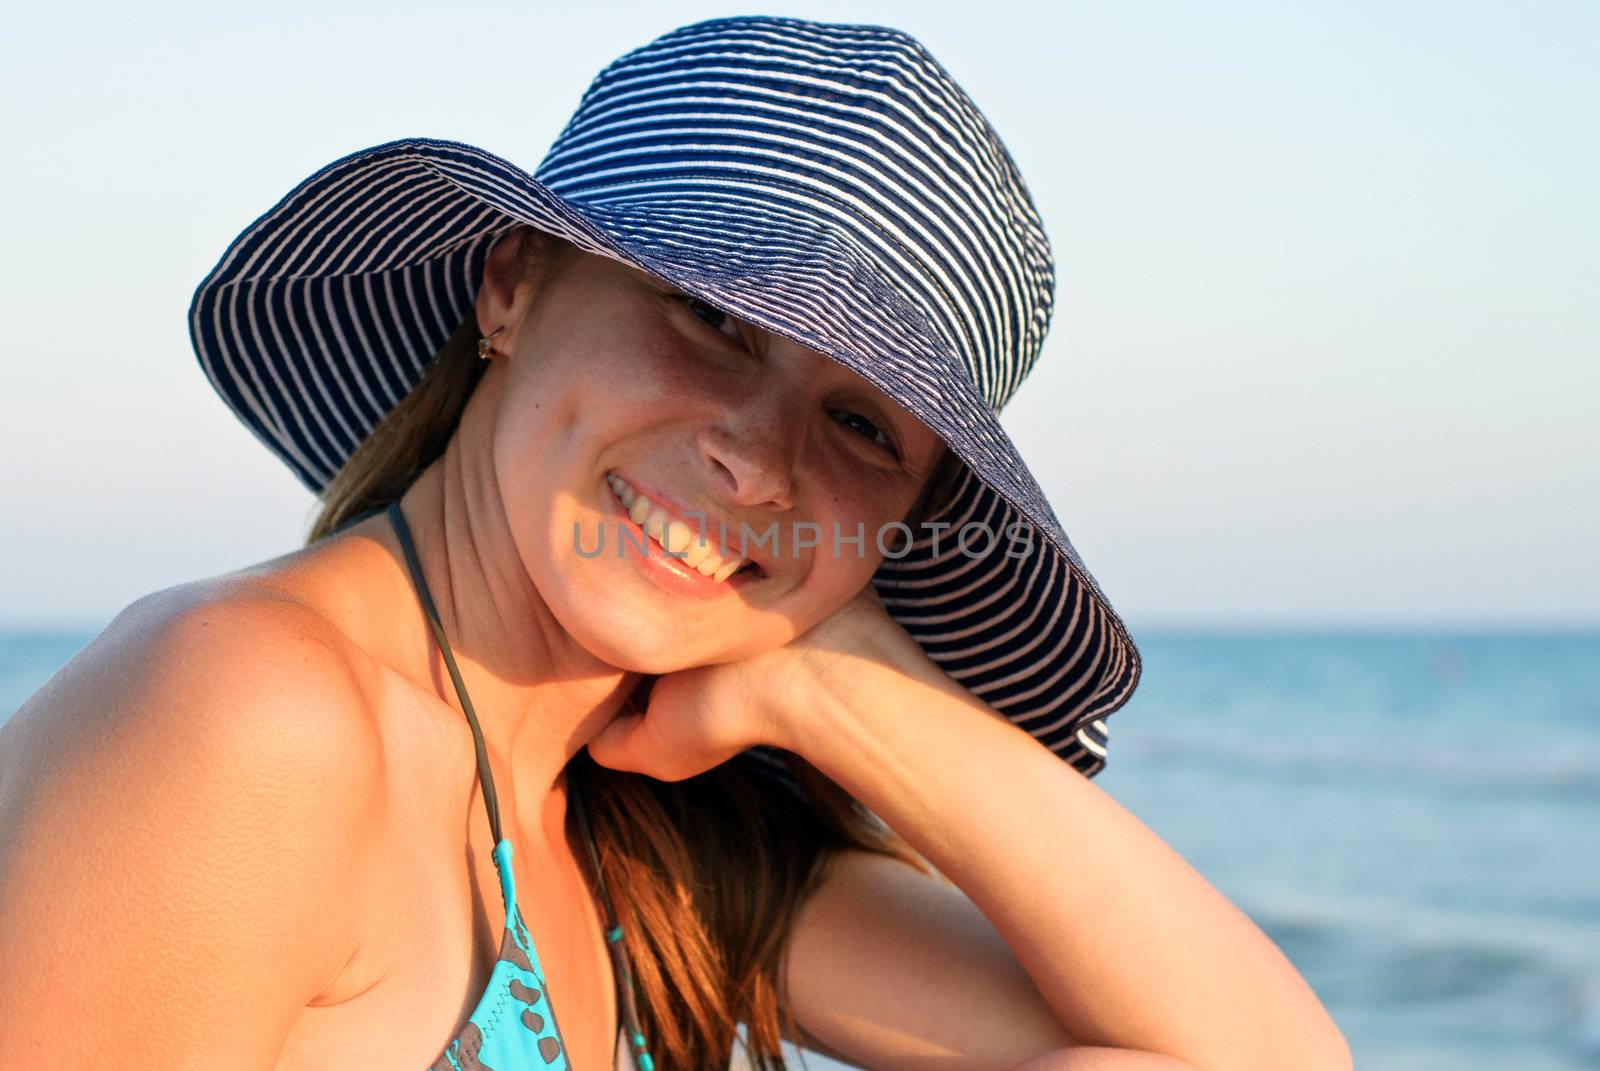 Young woman in a hat sitting on a beach